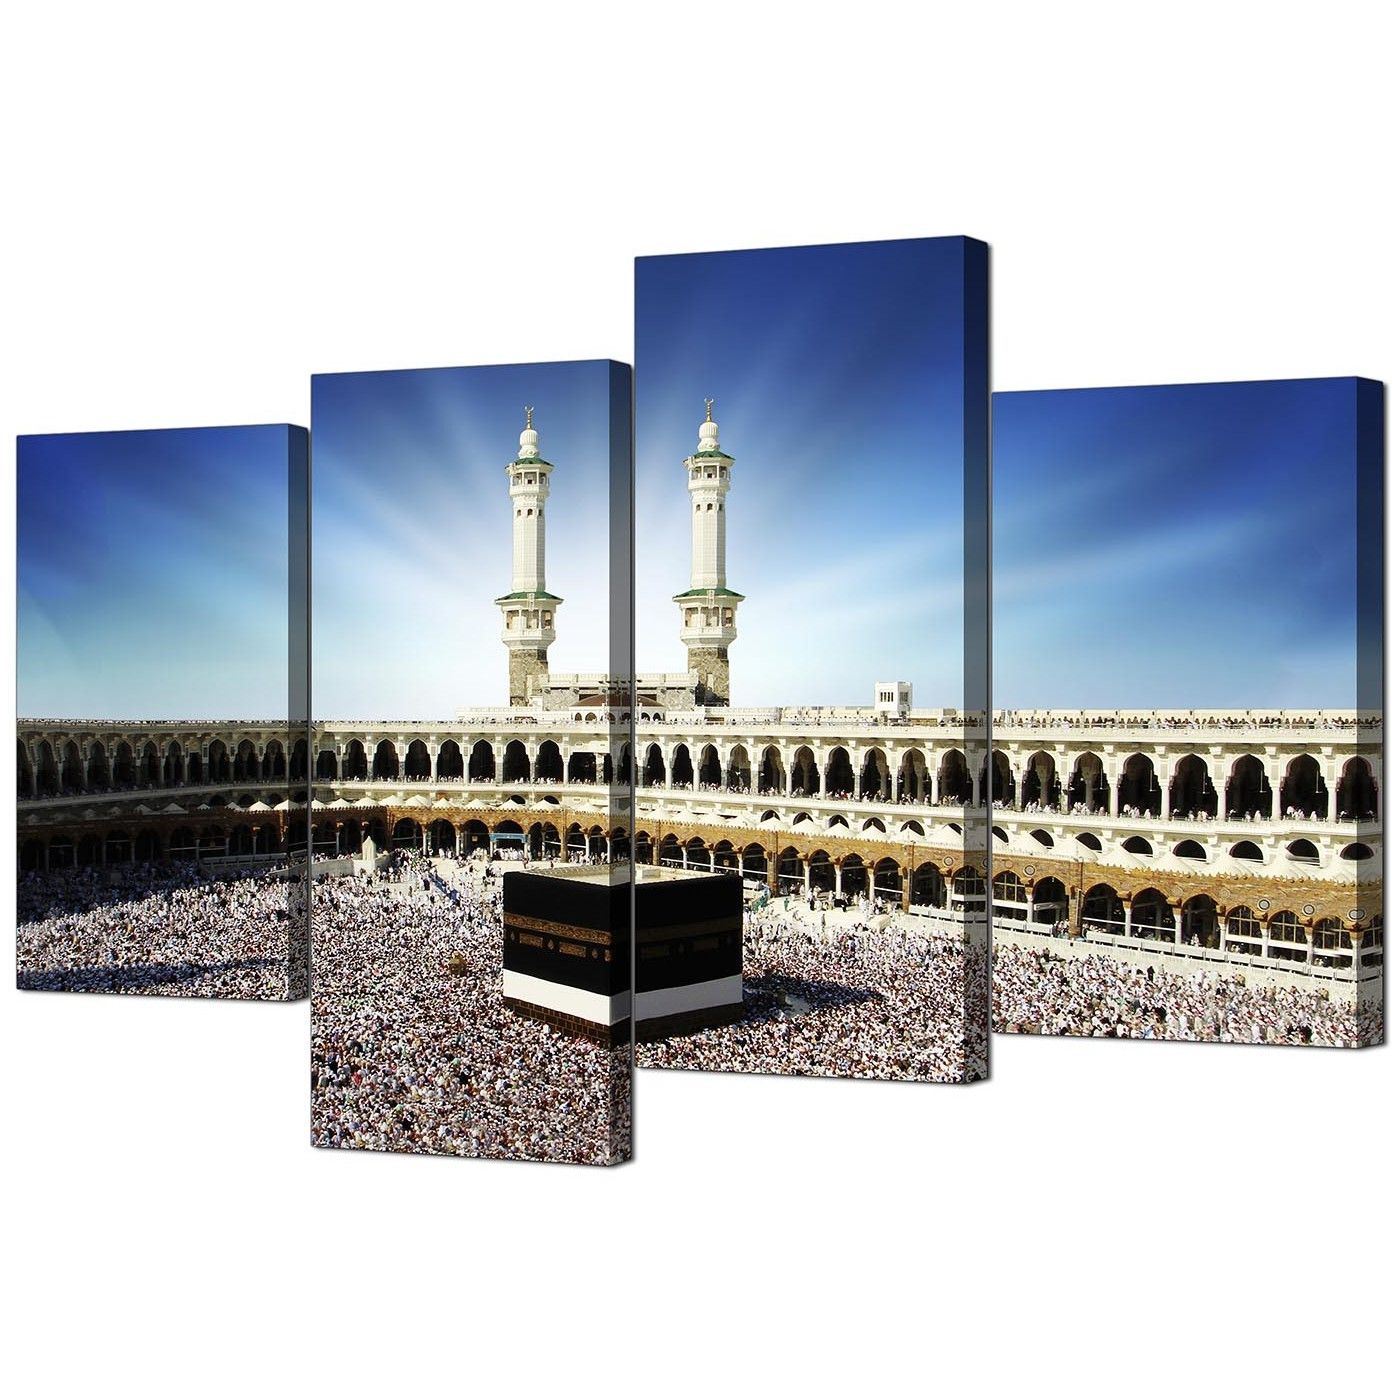 Cheap Canvas Wall Art Throughout Best And Newest Islamic Canvas Wall Art Of Kaaba Hajj In Mecca For Muslims – Set Of  (View 3 of 15)